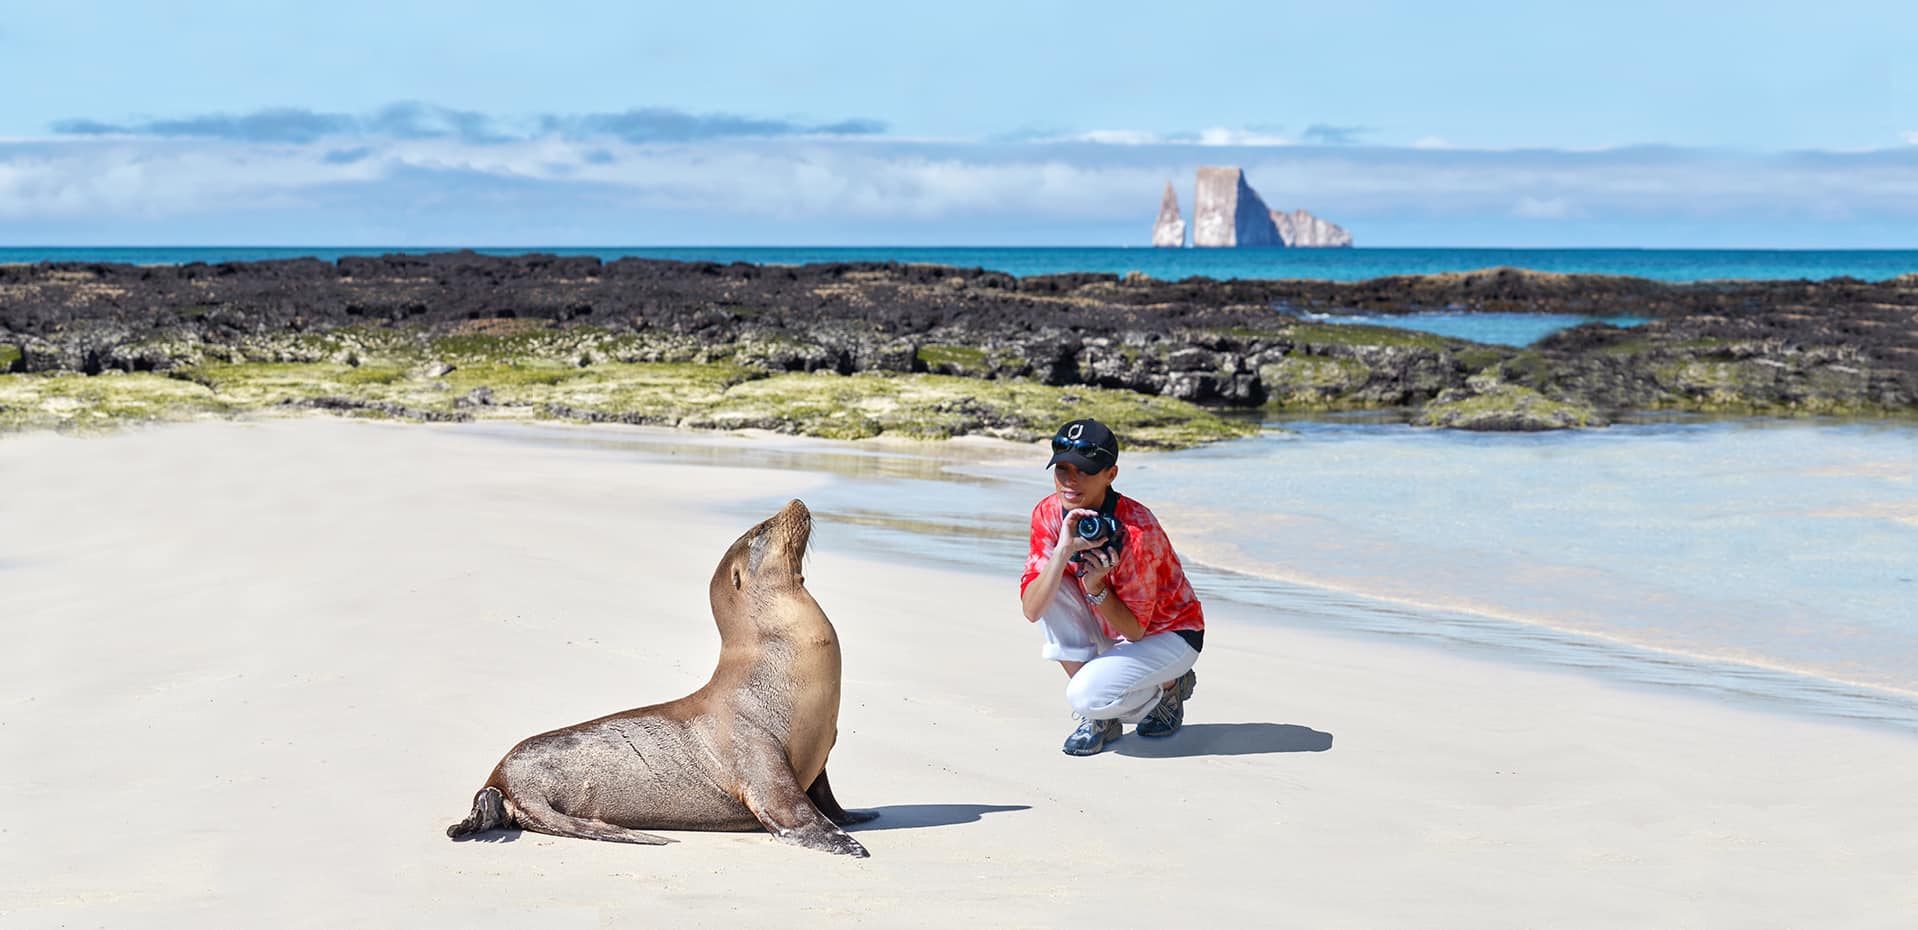 Get up-close to wildlife on our Galapagos Islands walking tour